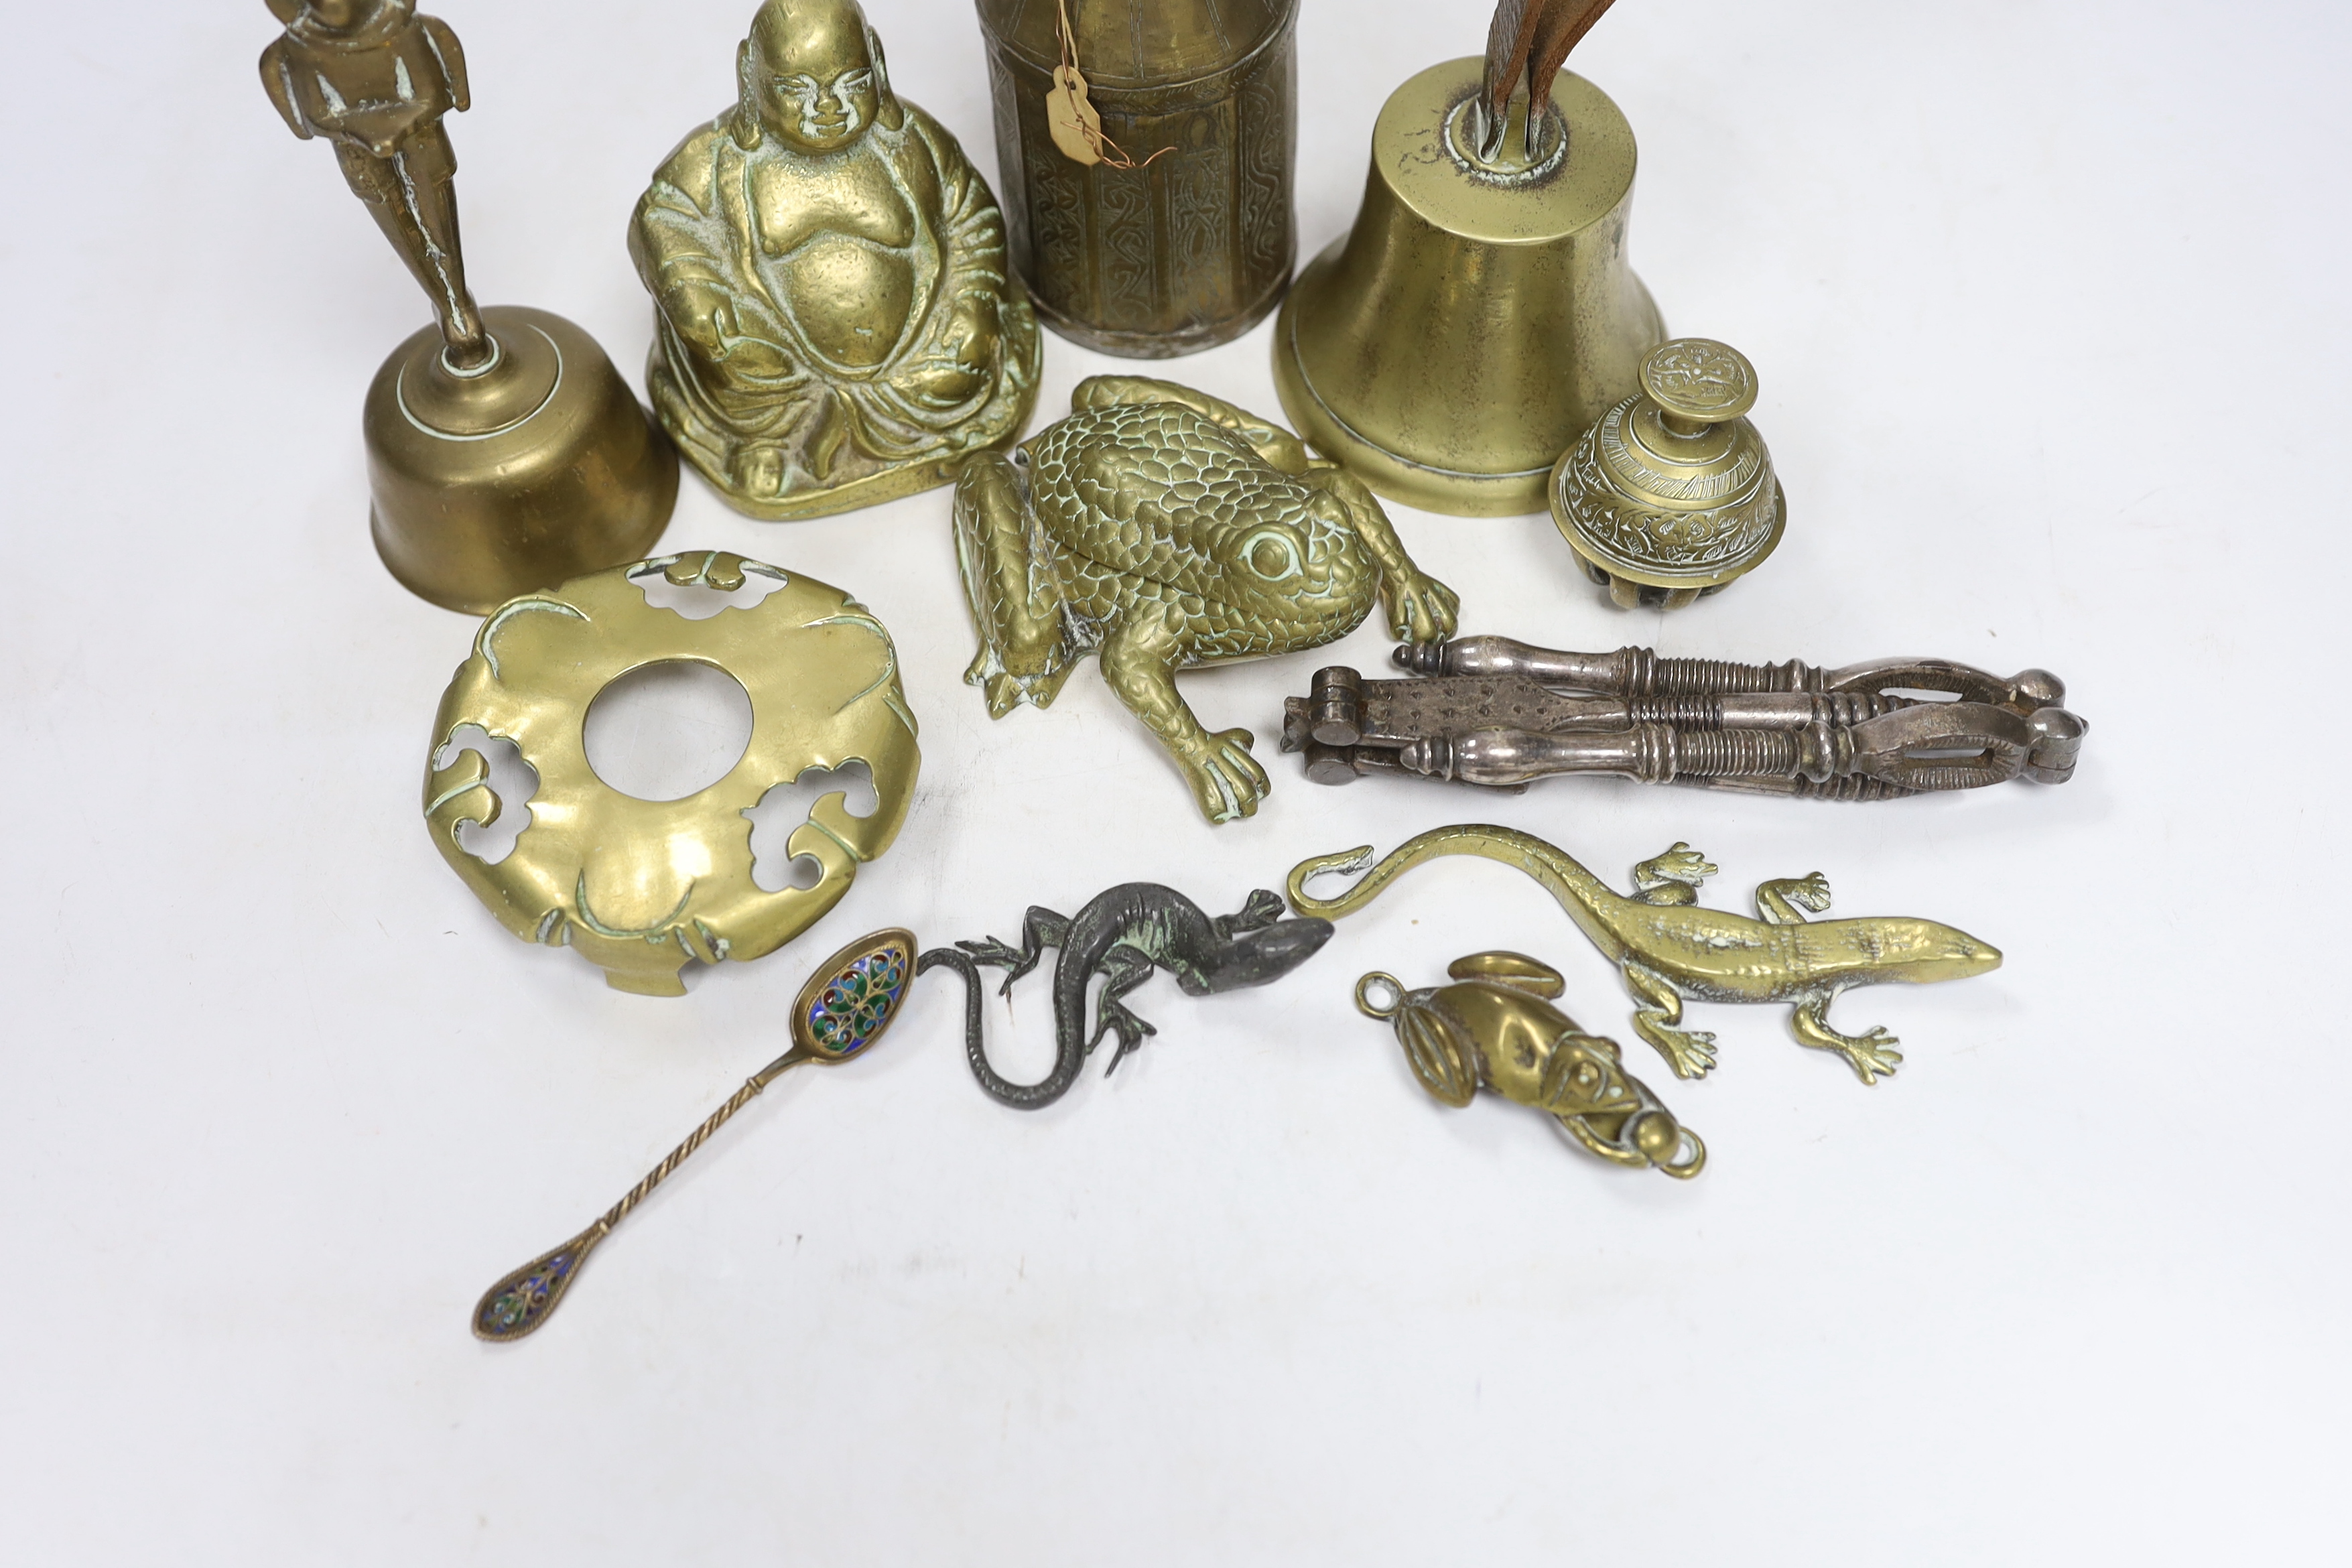 Sundry metalware including hinged brass frog with compartment, nutcrackers, a seated Buddha and a - Image 4 of 6